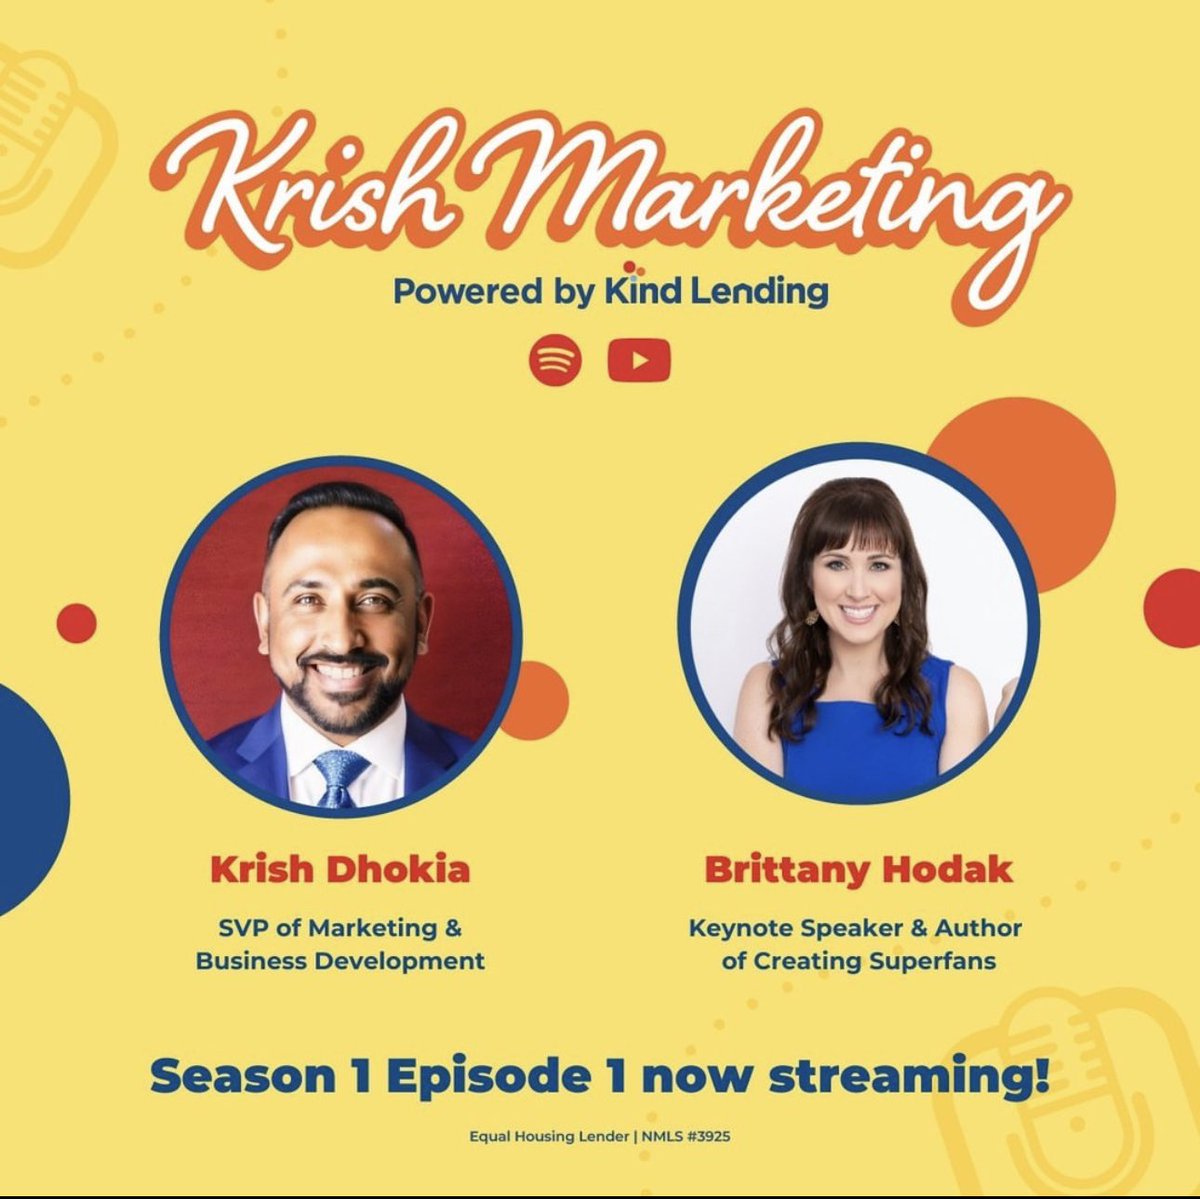 Listen to the Krish Marketing Podcast,  as I sit down with @BrittanyHodak , a renowned keynote speaker and the author of the bestselling book 'Creating Superfans.'
youtu.be/7xsUsmst6RE?si…

#krishmarketing #creatingsuperfans #brittanyhodak #kindmovement #kindlending @KindLending